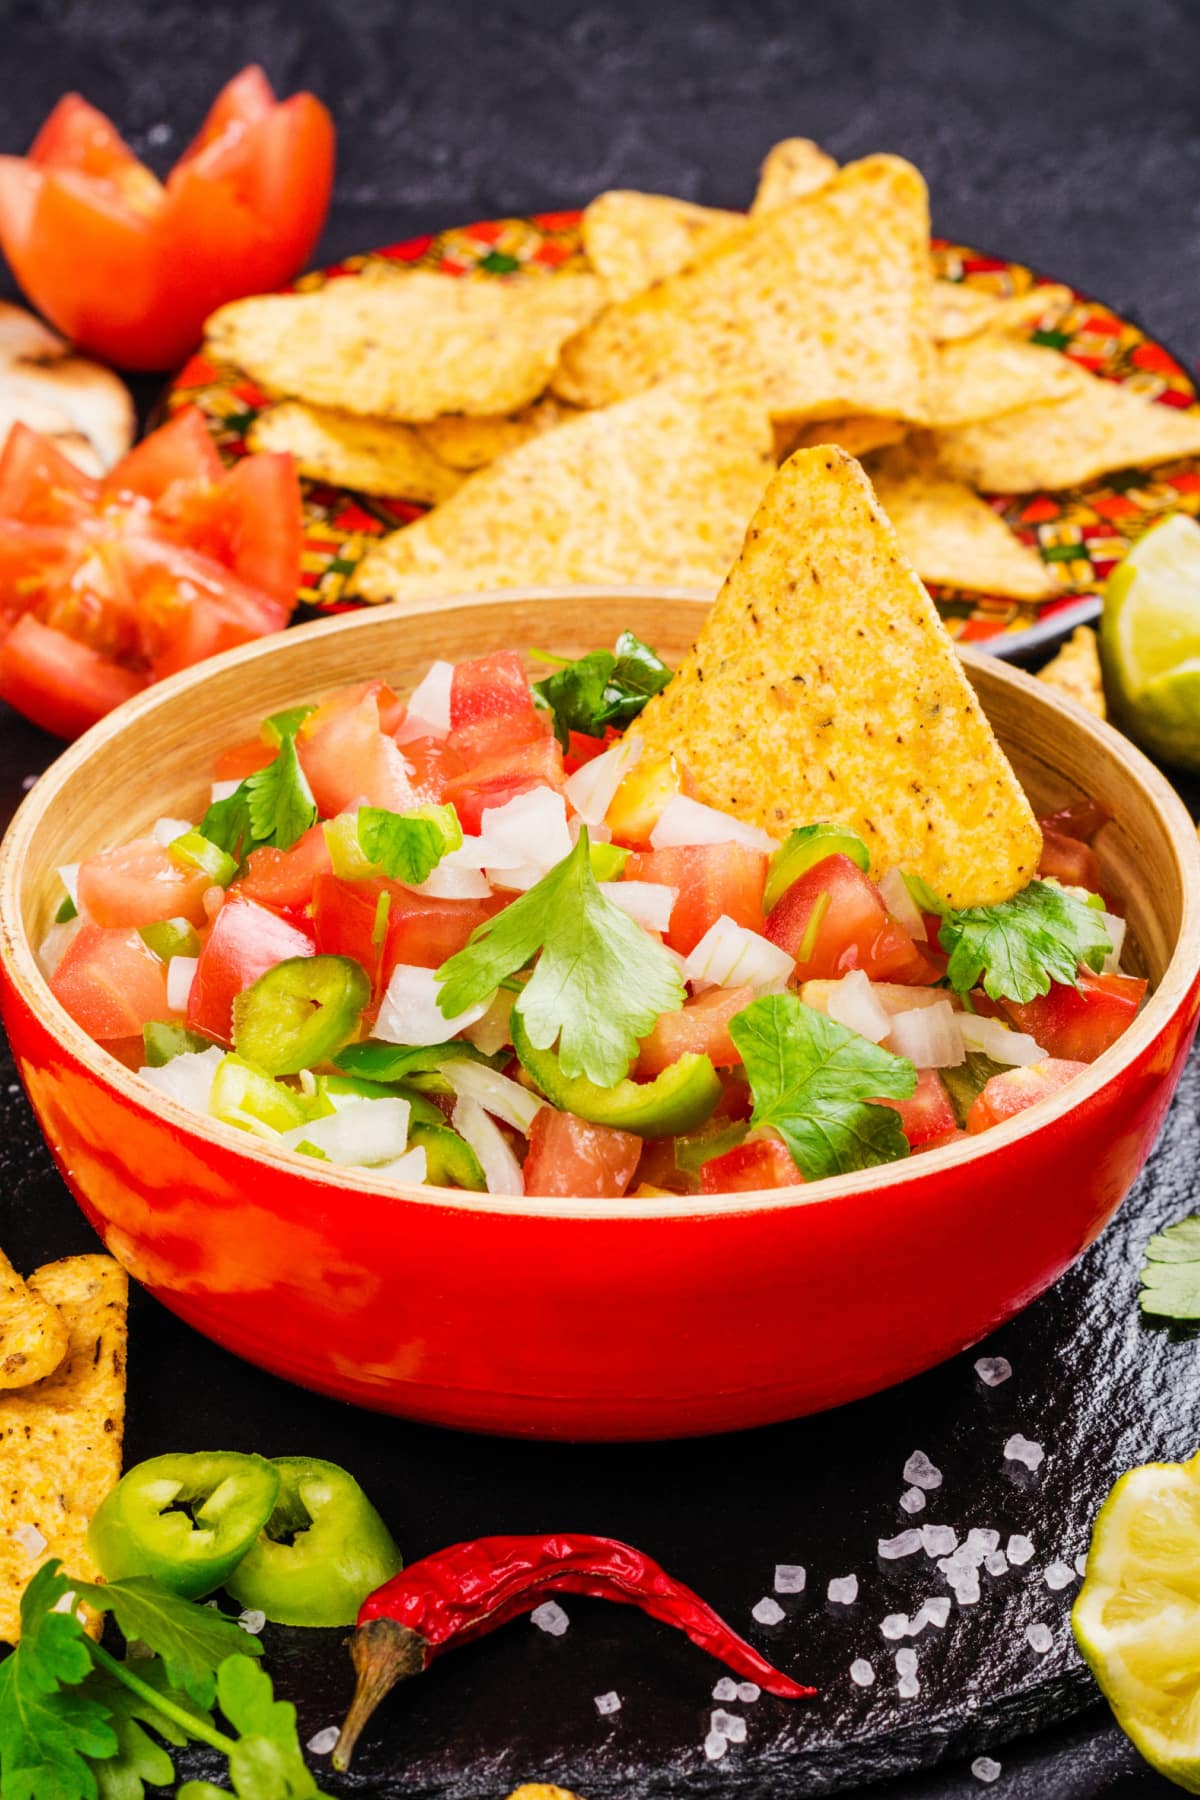 Diced tomatoes, onions, cilantro, and jalapenos mixed together and served with nachos.